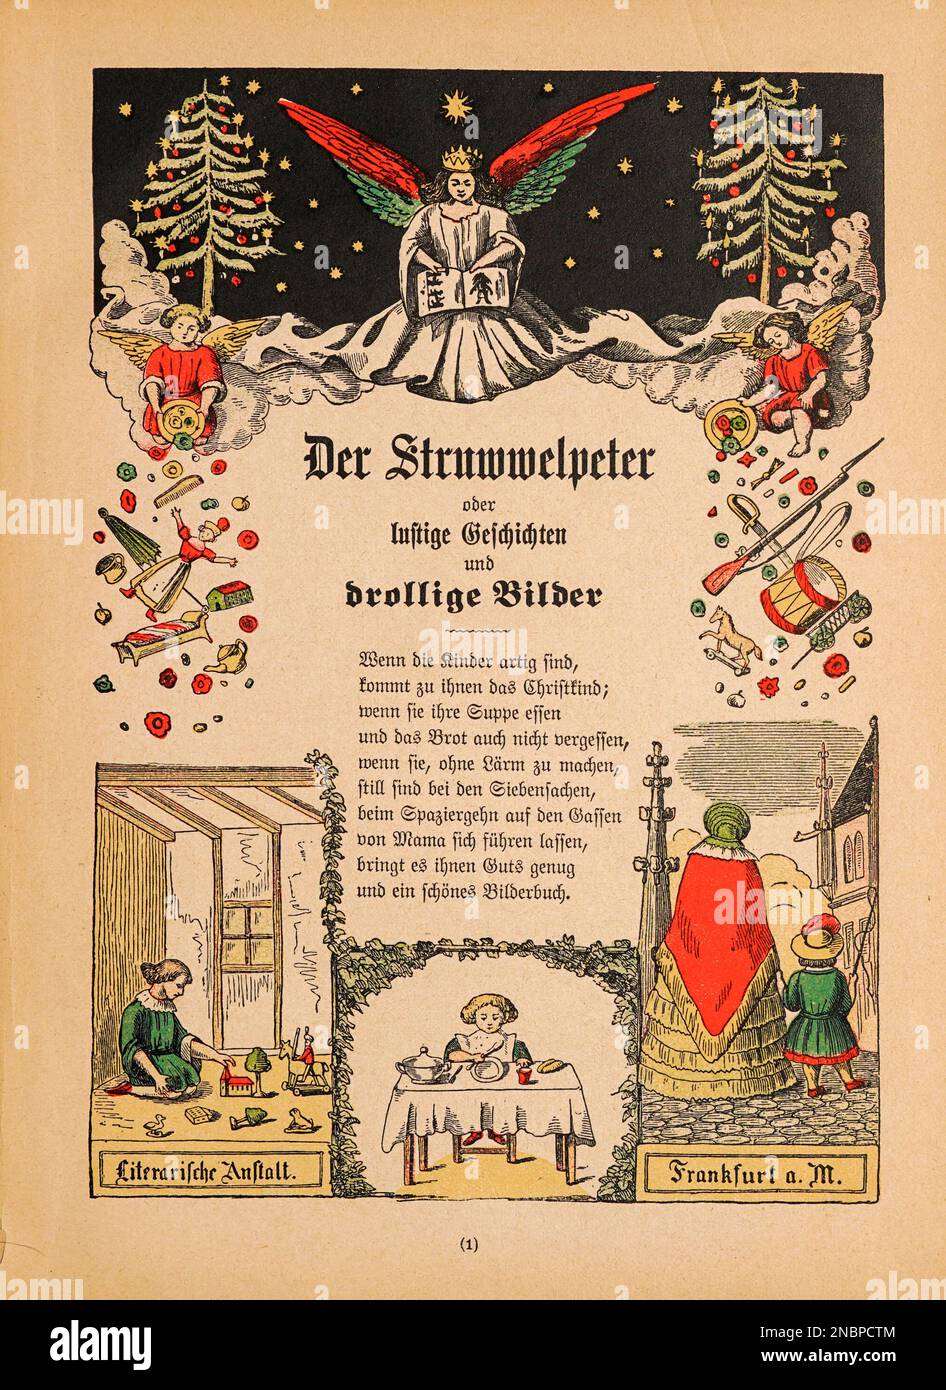 Title page from the original German Version of the book ' Das Struwwelpeter-album : aus Bilderbüchern ' by Hoffmann, Heinrich, 1809-1894 Publication date 1900 Publisher Frankfurt am Main : Rütten & Loening [ Der Struwwelpeter ('shock-headed Peter' or 'Shaggy Peter') is an 1845 German children's book by Heinrich Hoffmann. It comprises ten illustrated and rhymed stories, mostly about children. Each has a clear moral that demonstrates the disastrous consequences of misbehavior in an exaggerated way.[1] The title of the first story provides the title of the whole book. Der Struwwelpeter is one of Stock Photo